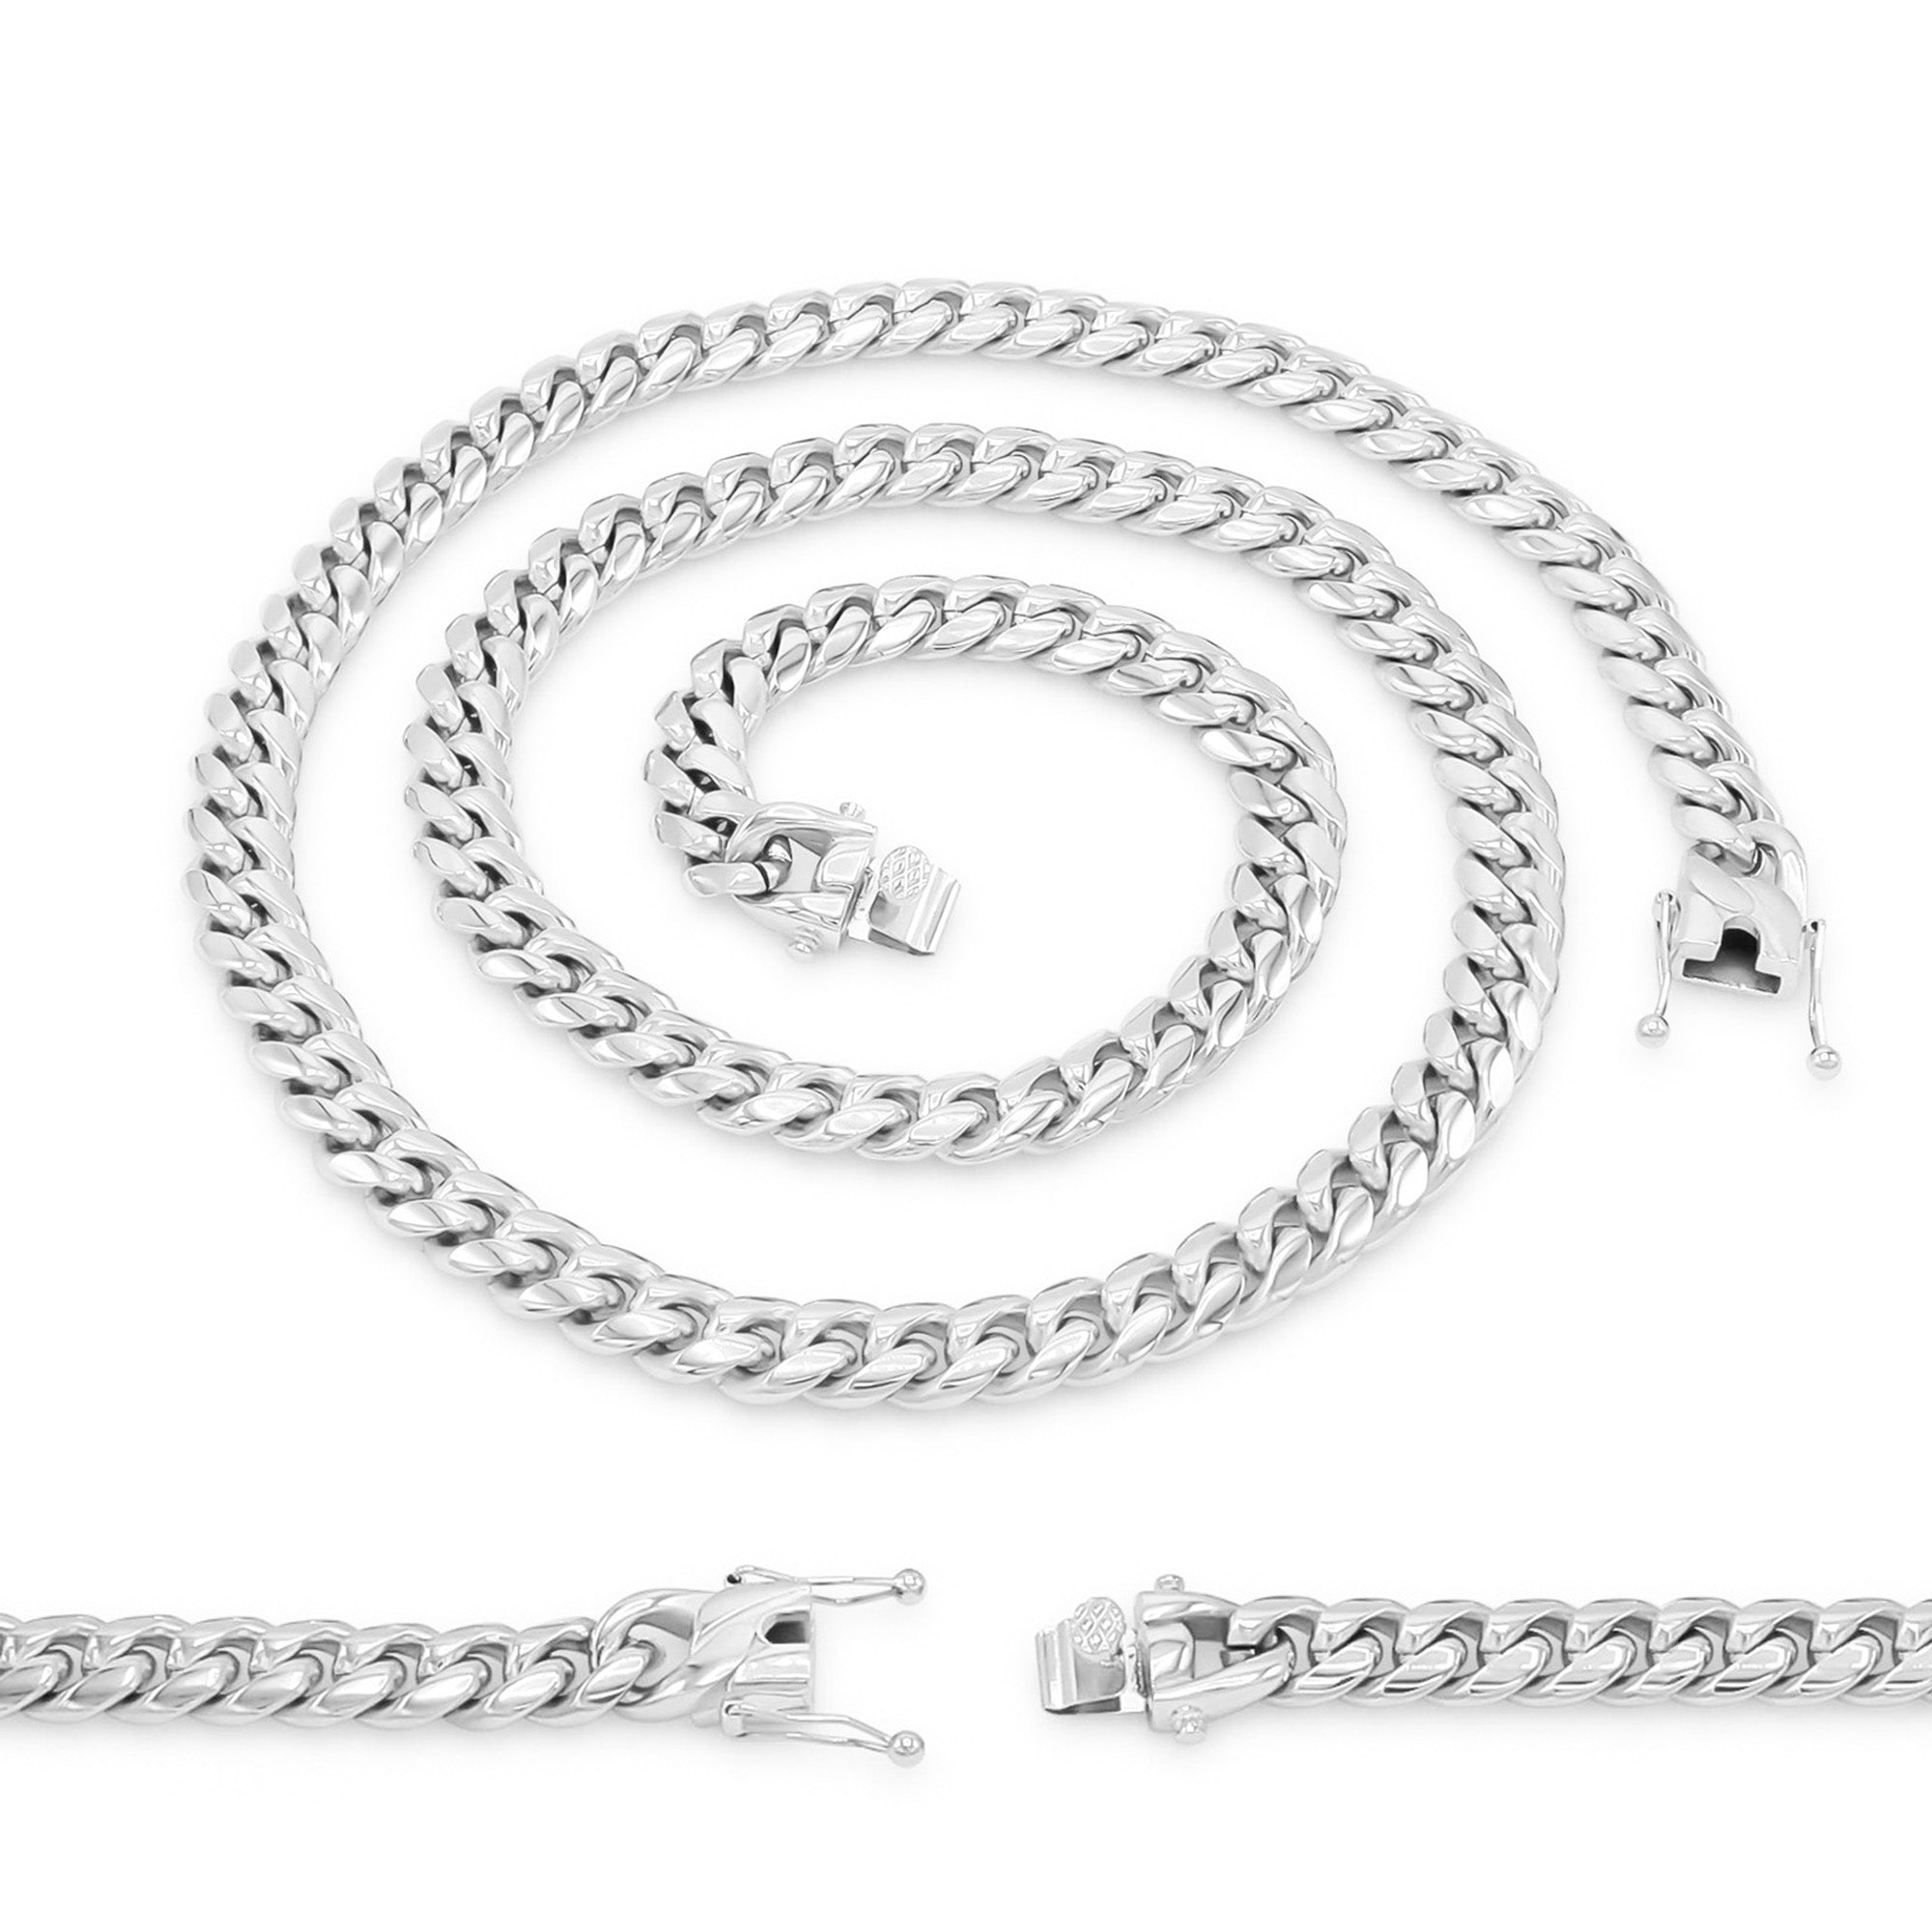 Silver Cuban Link Stainless Steel Necklace 30"